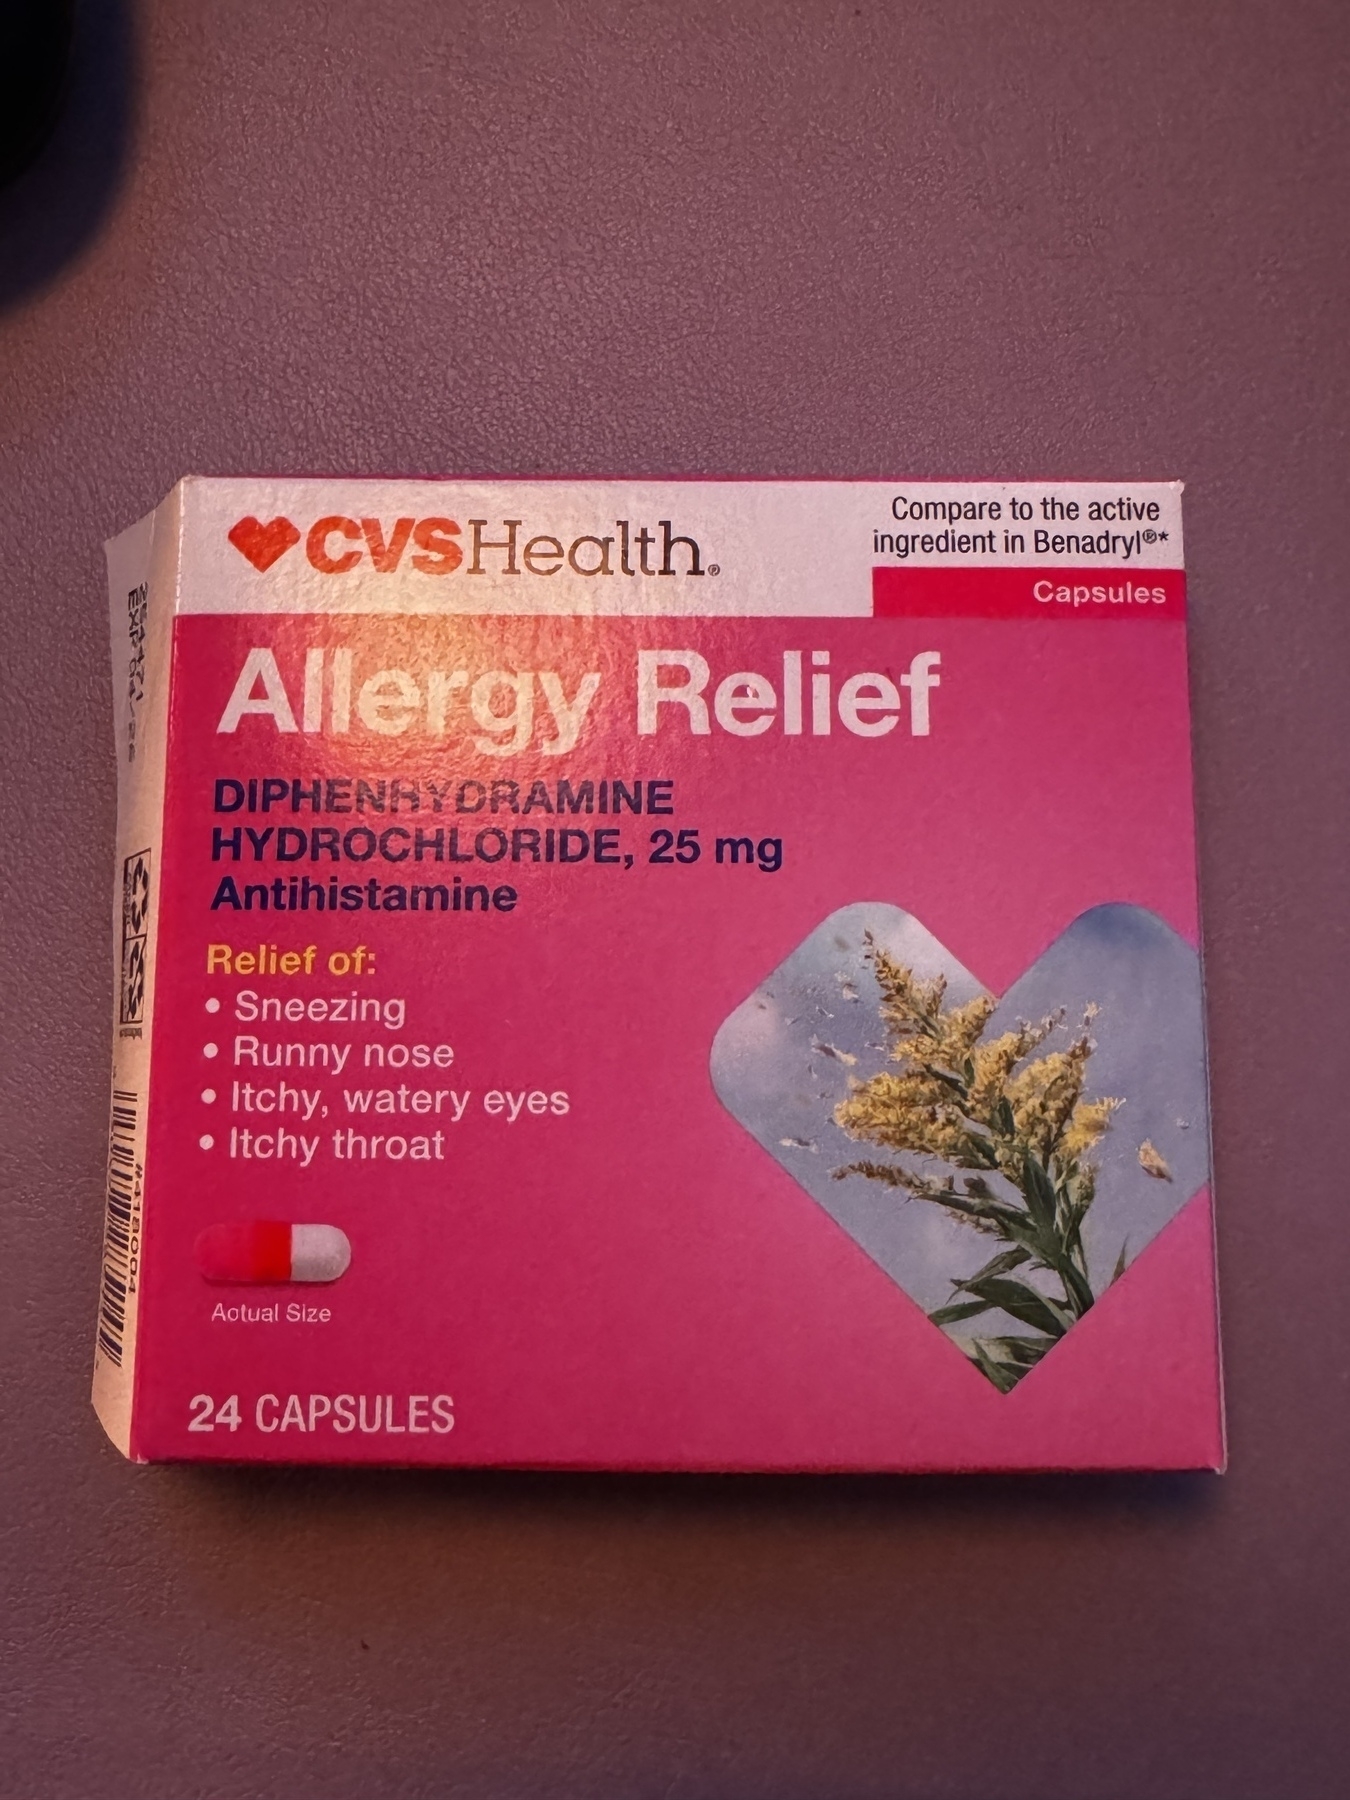 A box of CVS Health Allergy Relief capsules displaying the list of symptoms it relieves, the active ingredient, and a visual representation of the capsule size.